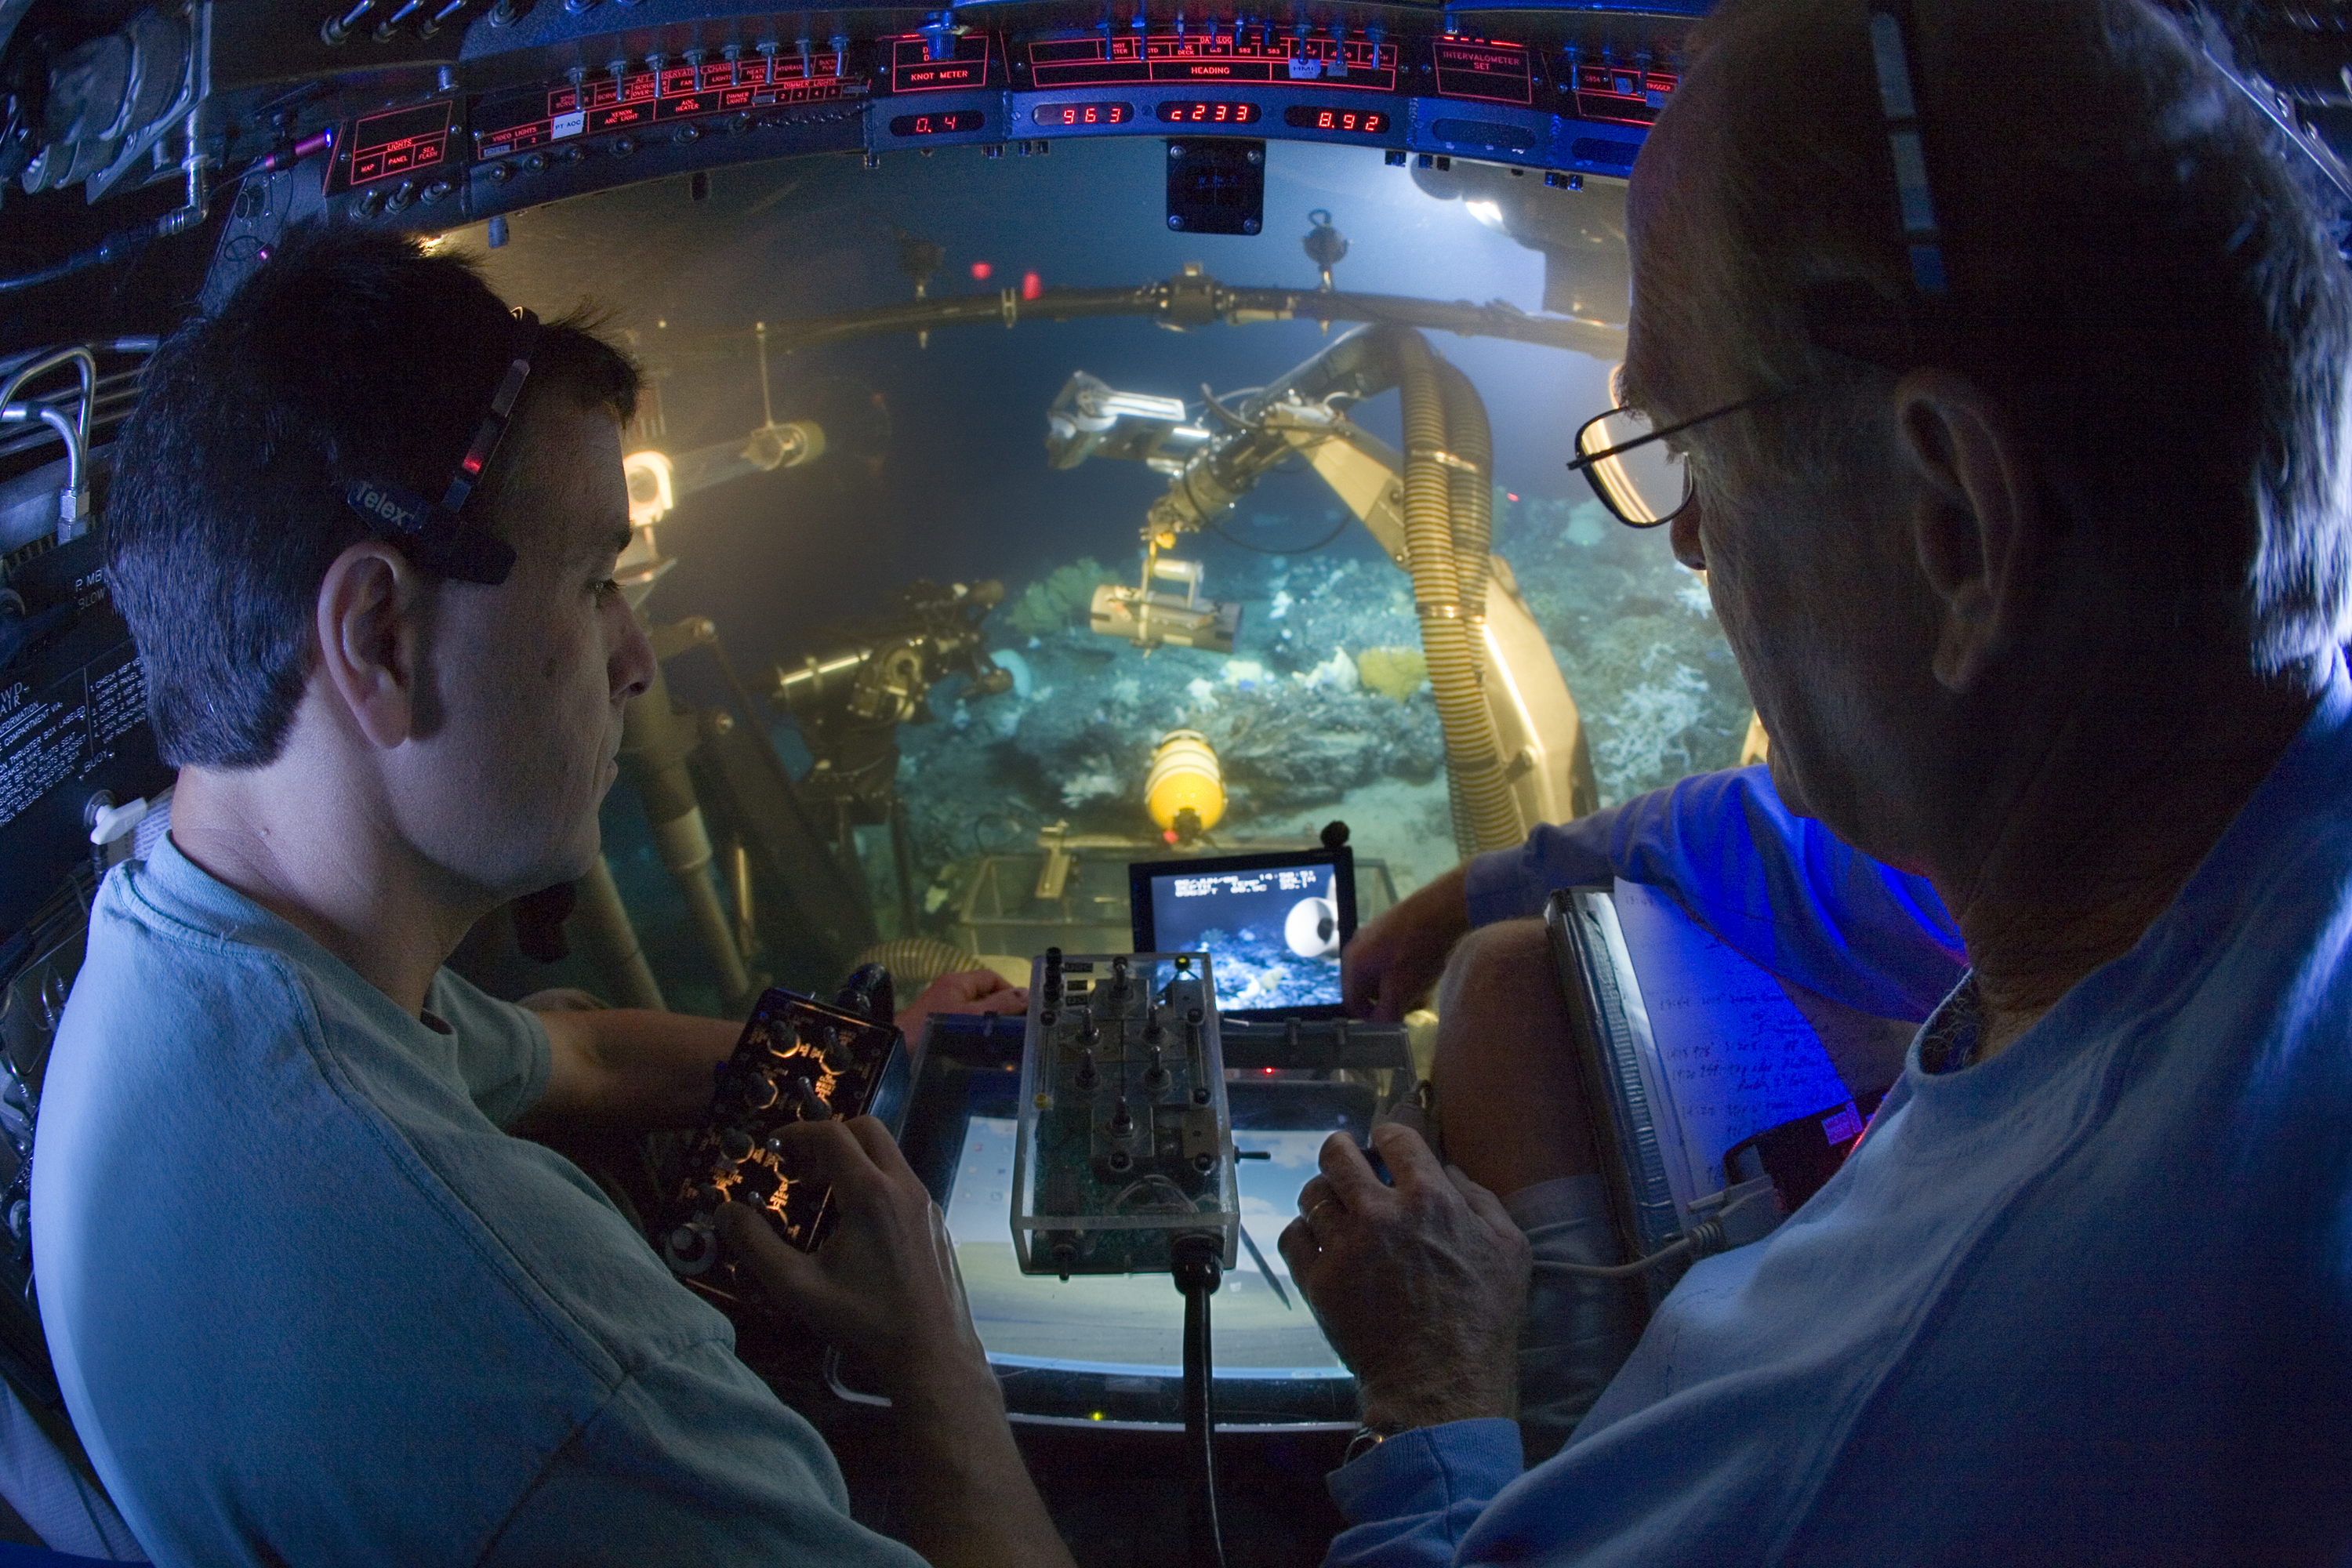 Pilot (L) and researcher in the sphere of the Johnson-Sea-Link submersible.